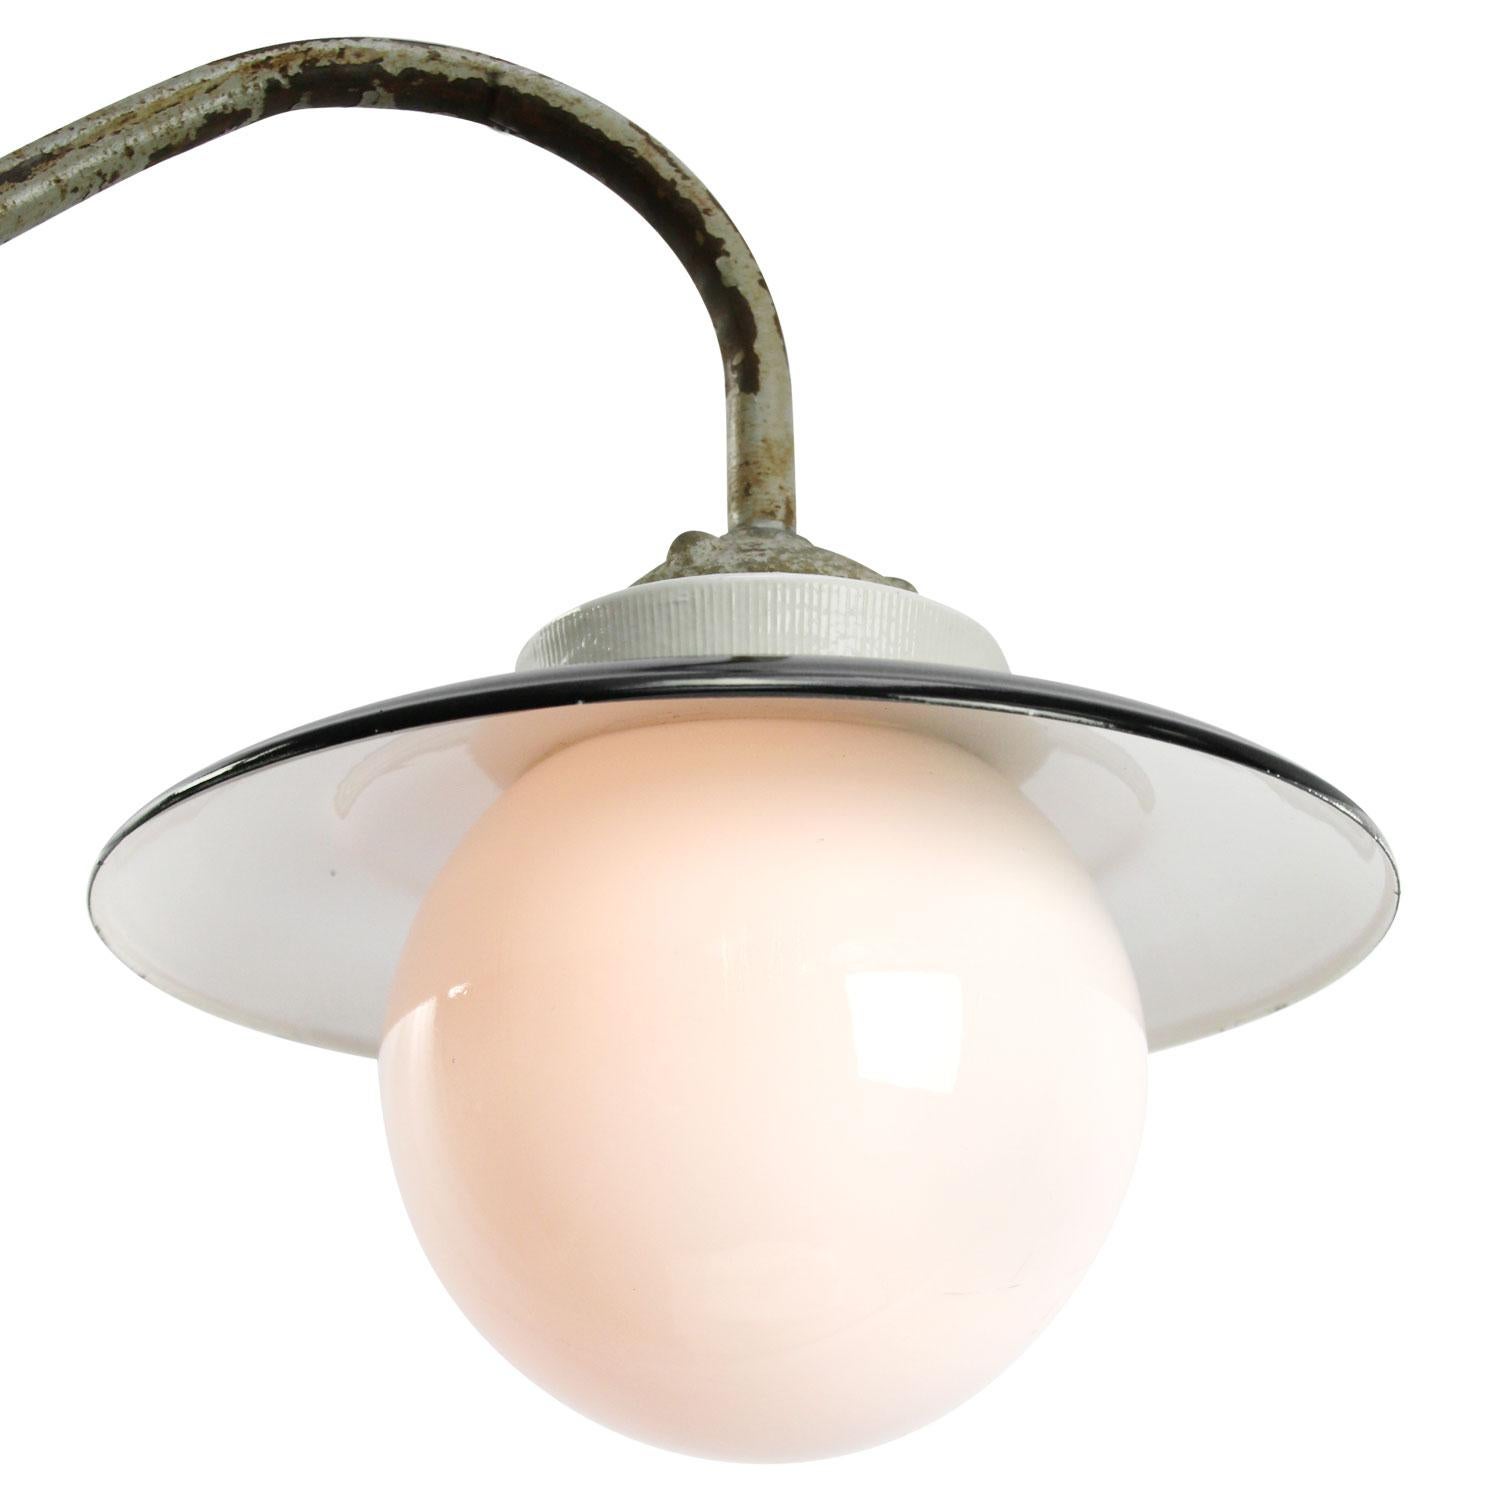 Black enamel industrial wall light with white interior.
Cast iron and porcelain top, opaline glass.
Diameter cast iron wall mount: 9 cm, 3 holes to secure.

Weight: 2.10 kg / 4.6 lb

Priced per individual item. All lamps have been made